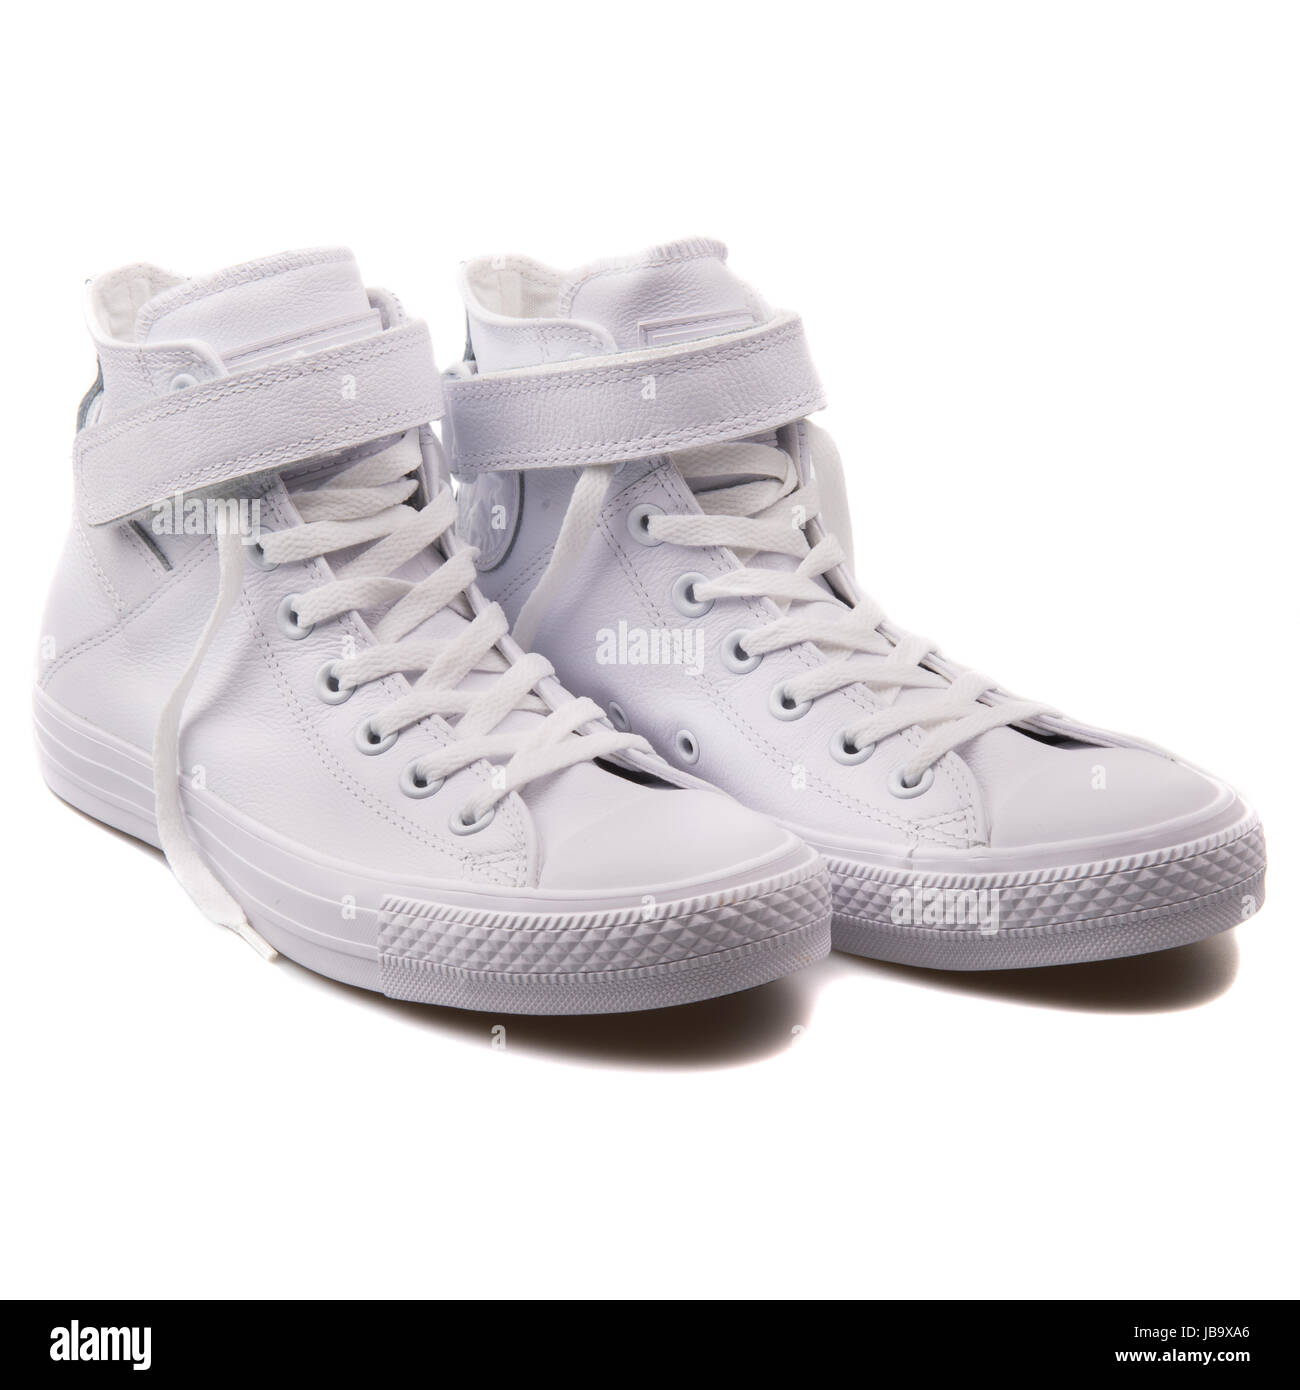 Converse Chuck Taylor All Star Brea Hi White Leather Women's Shoes -  549582C Stock Photo - Alamy